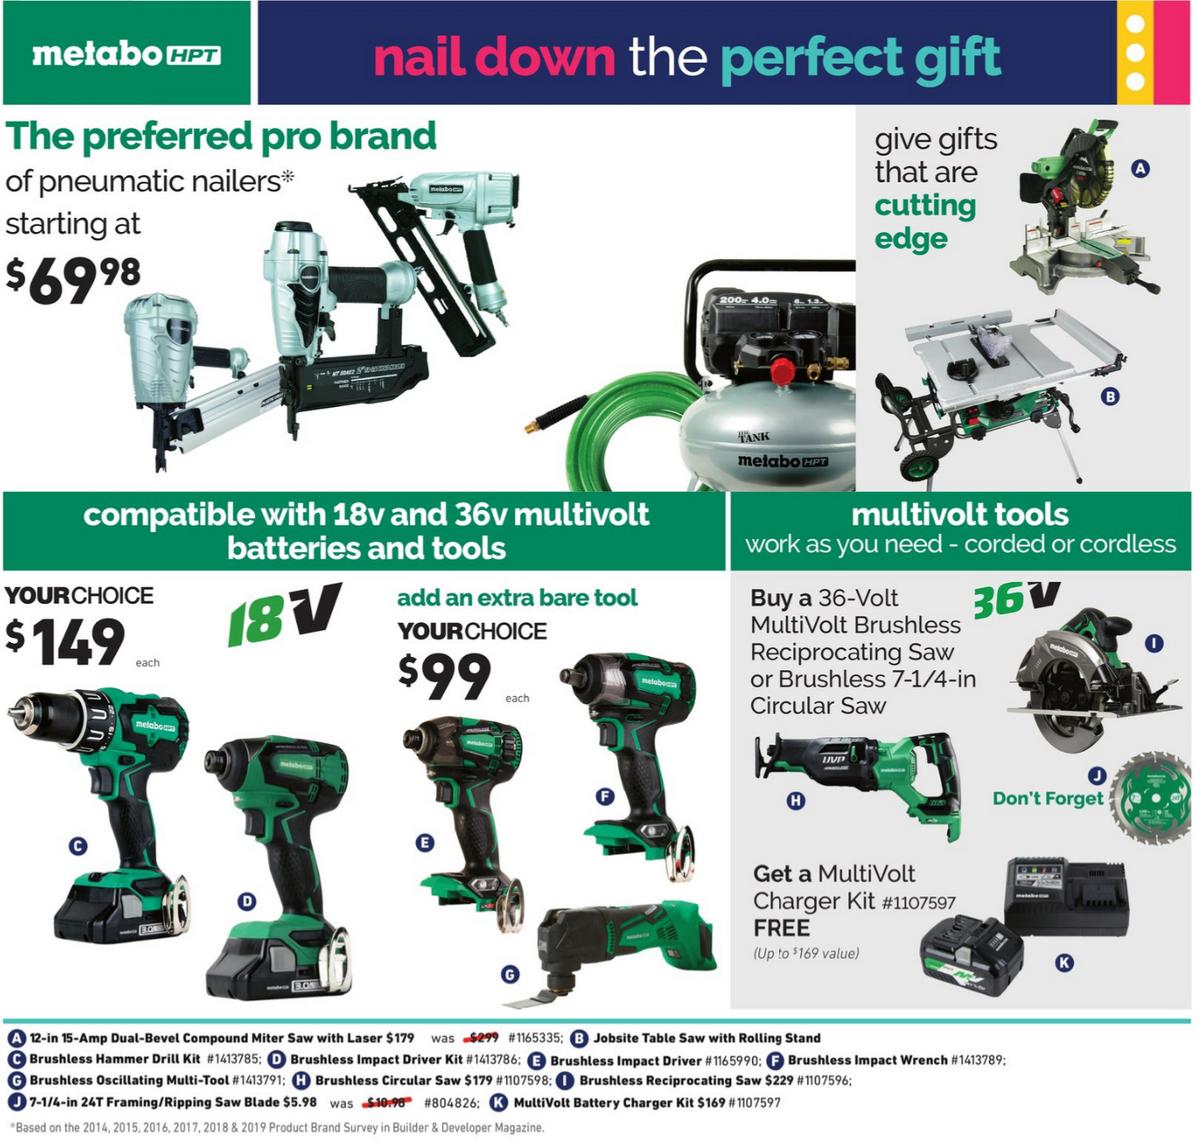 Lowe's Weekly Ad from December 10